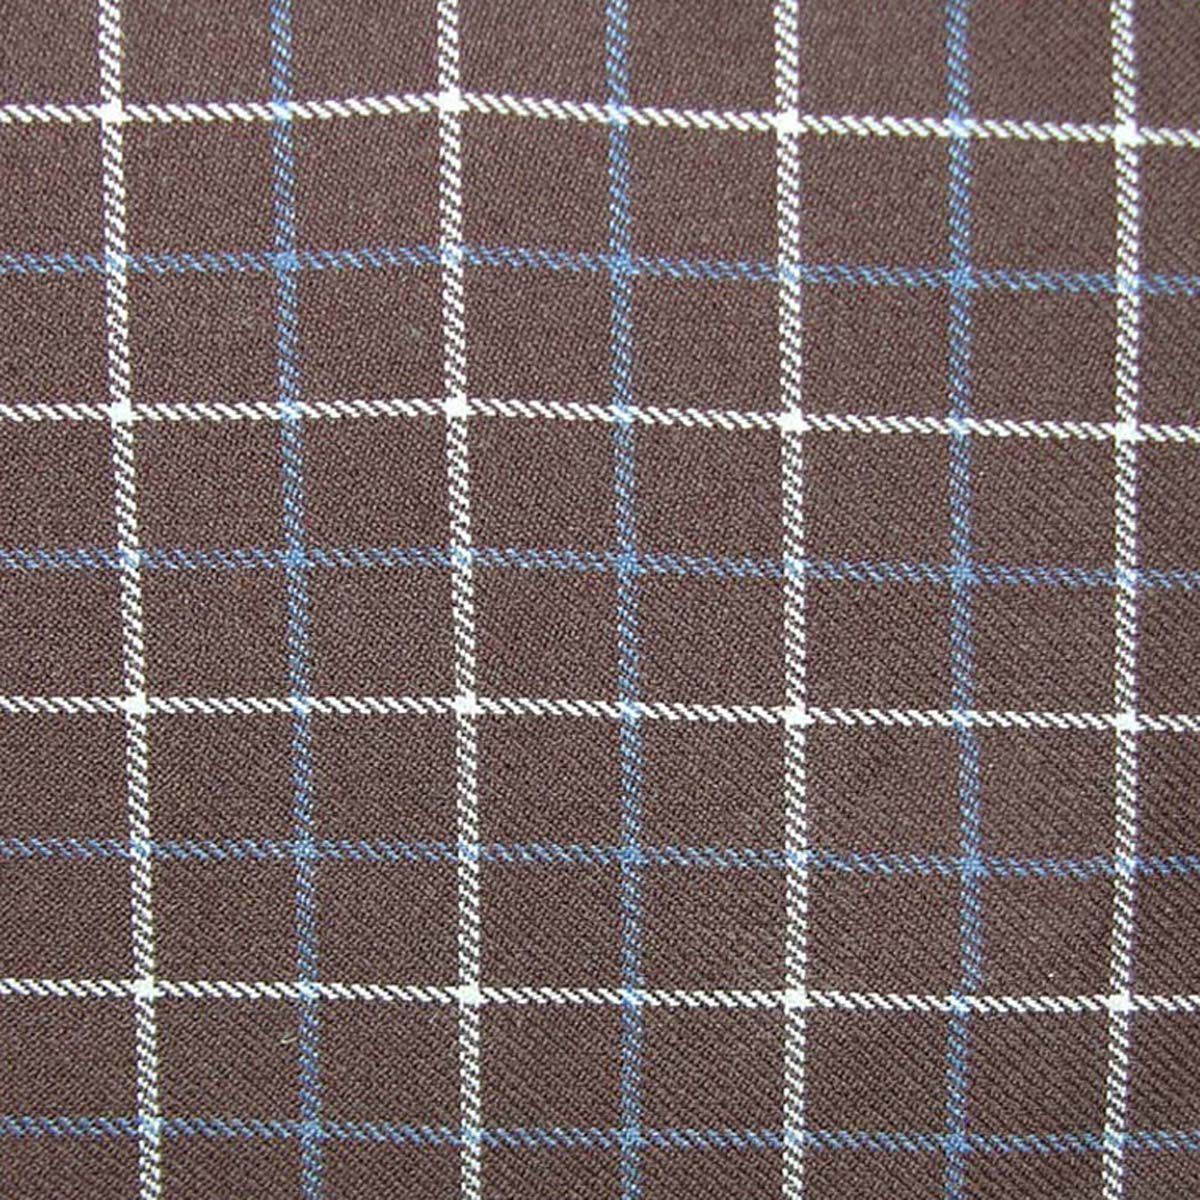 Mc Arthur fabric in chestnut color - pattern number BZ 00034500 - by Scalamandre in the Old World Weavers collection